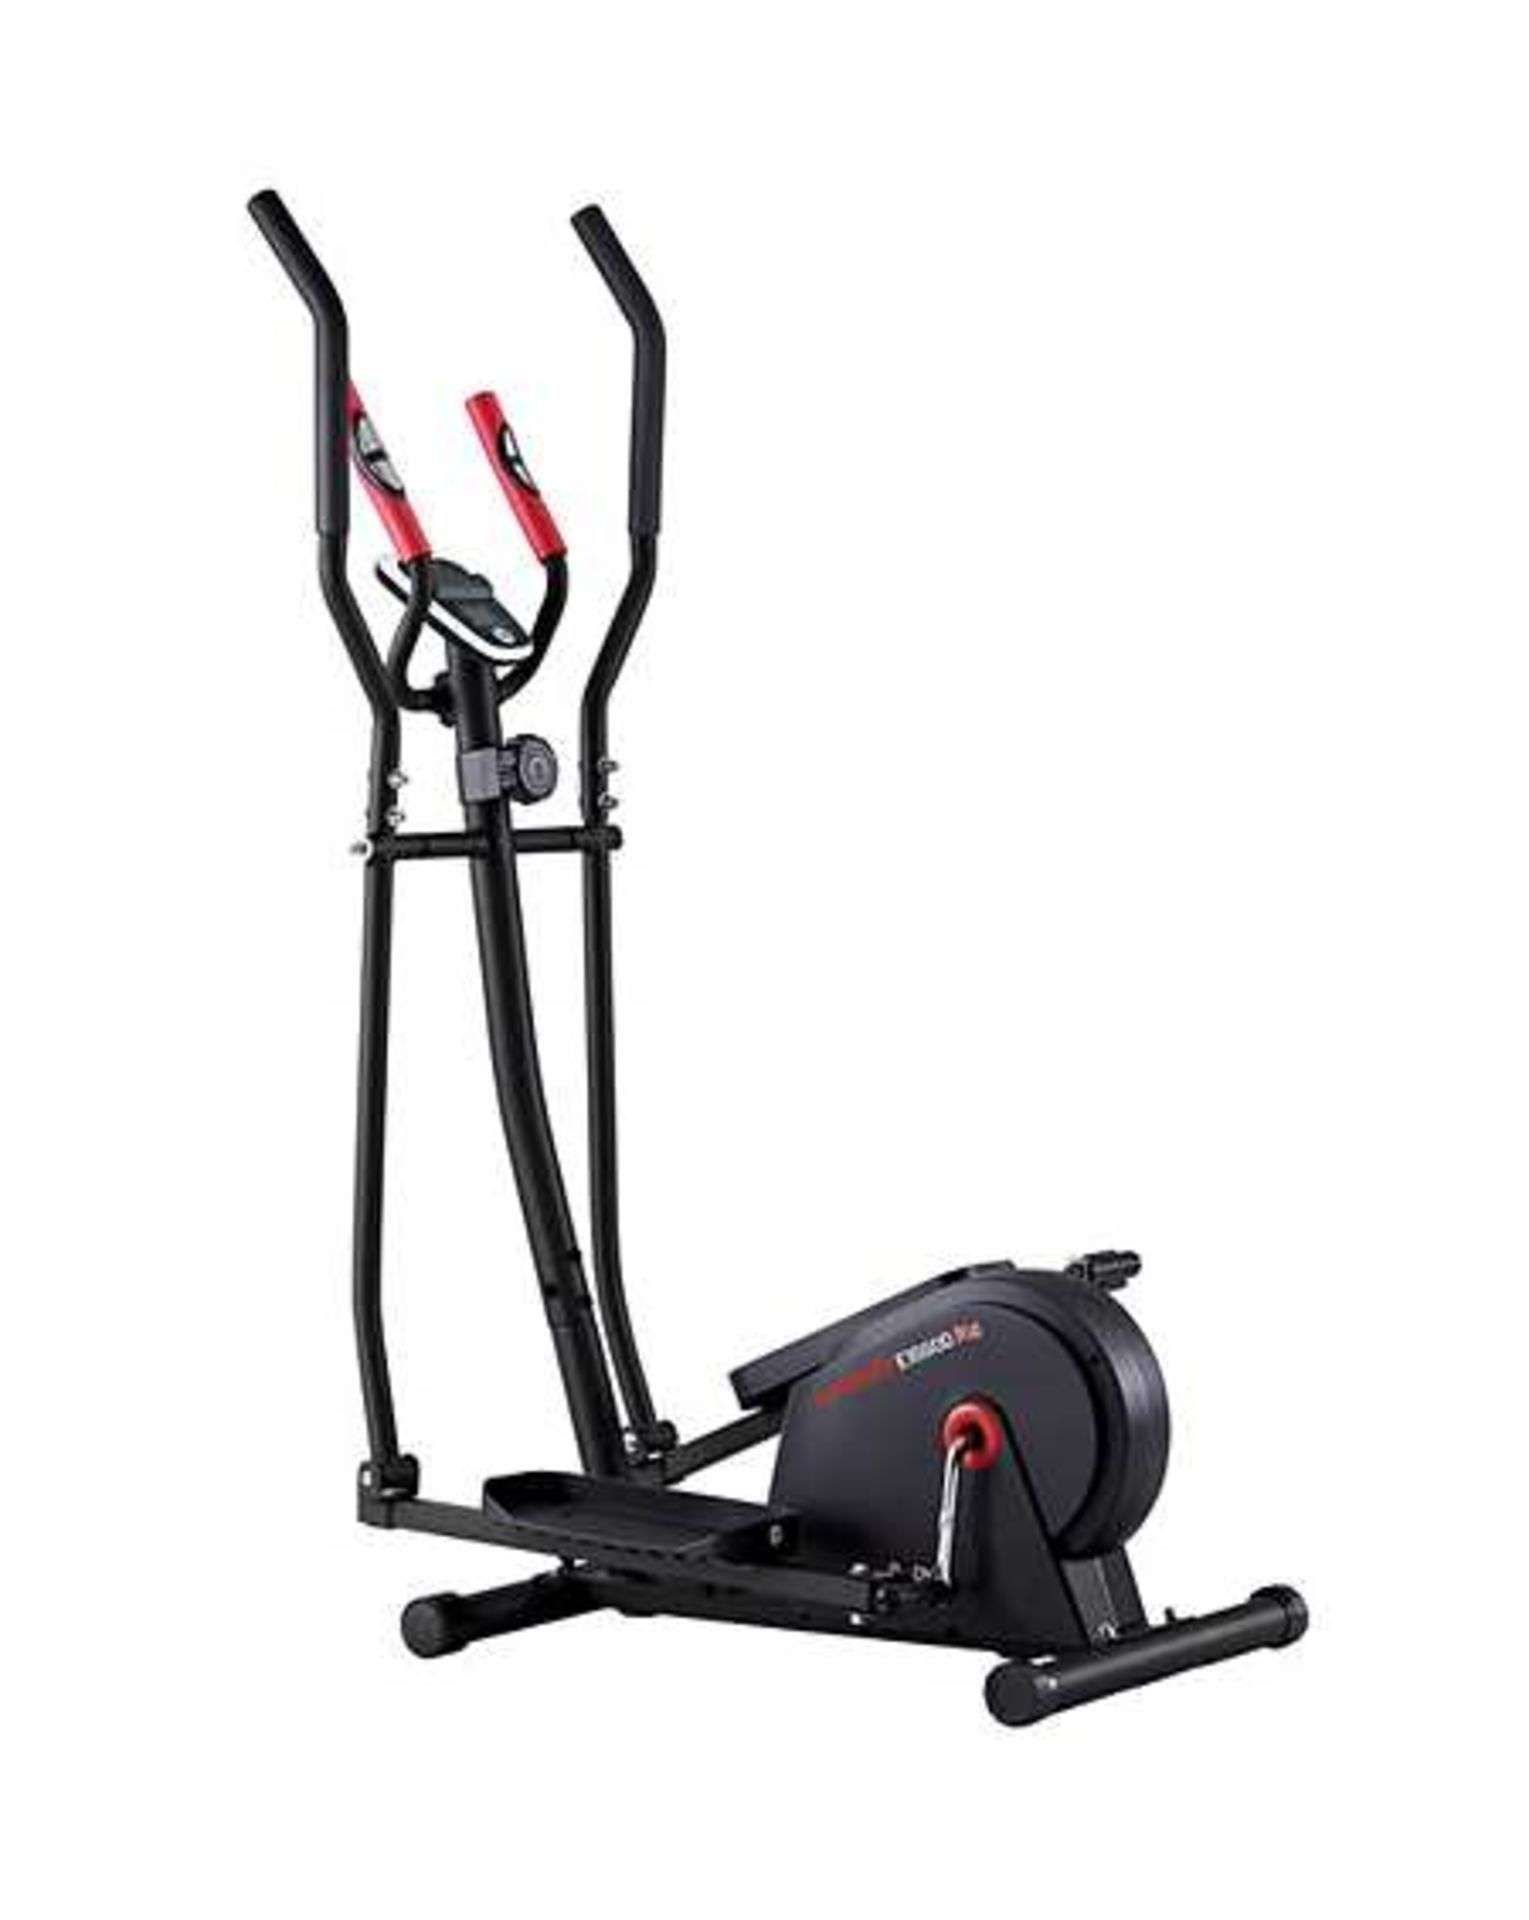 NEW & BOXED BODY SCULPTURE MAGNETIC ELLIPTICAL STRIDER. (R12-9)